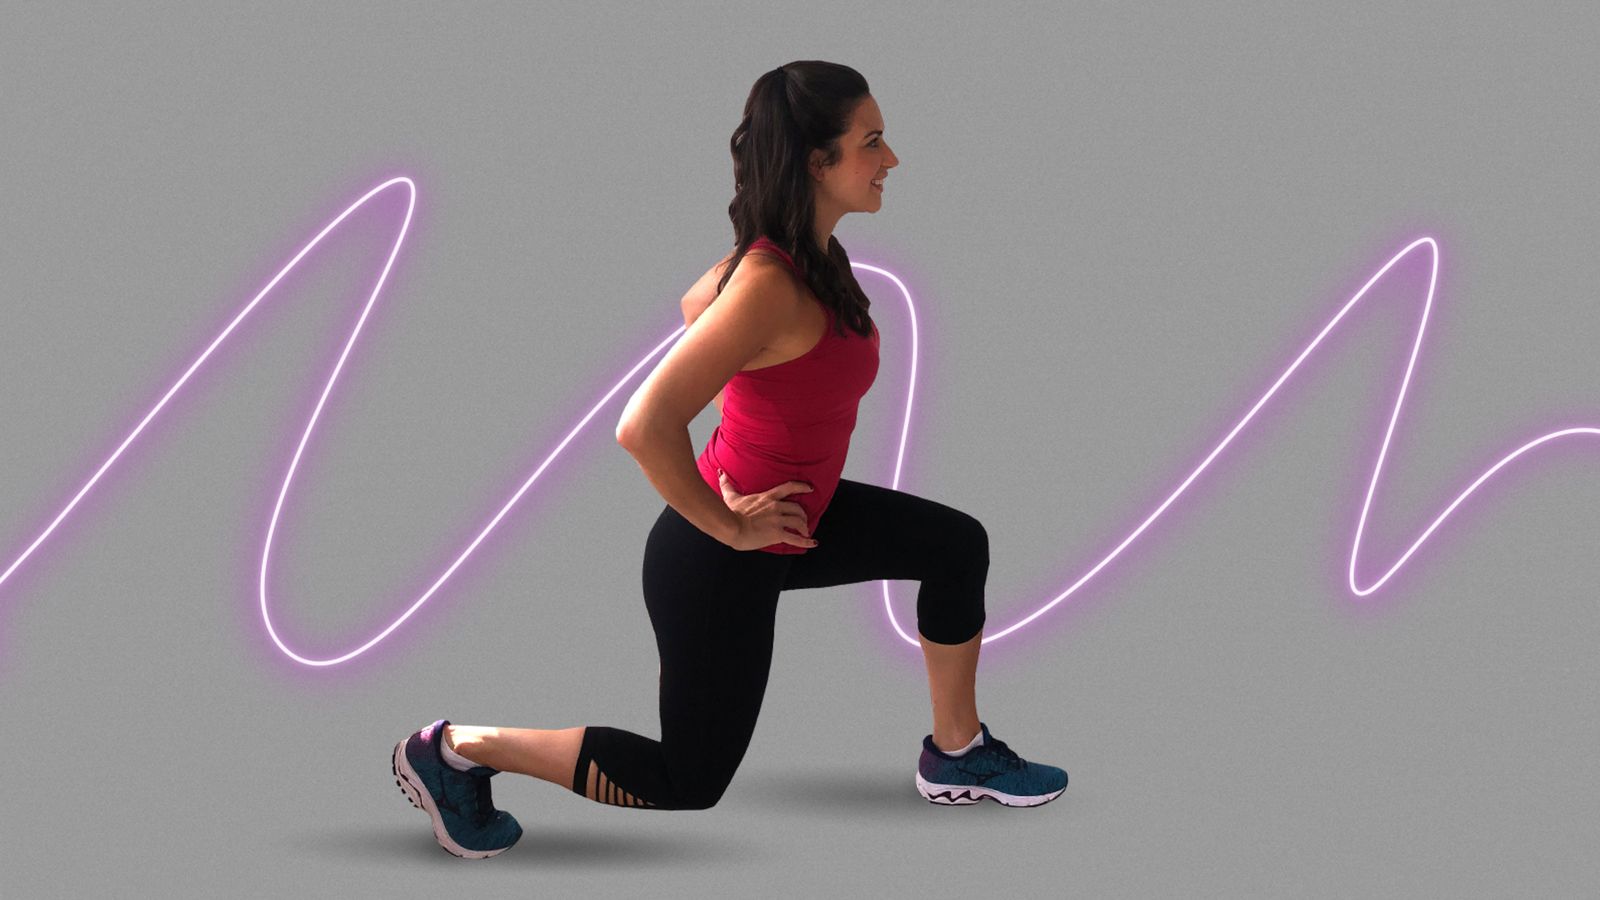 This 5-minute workout will tone and tighten your butt